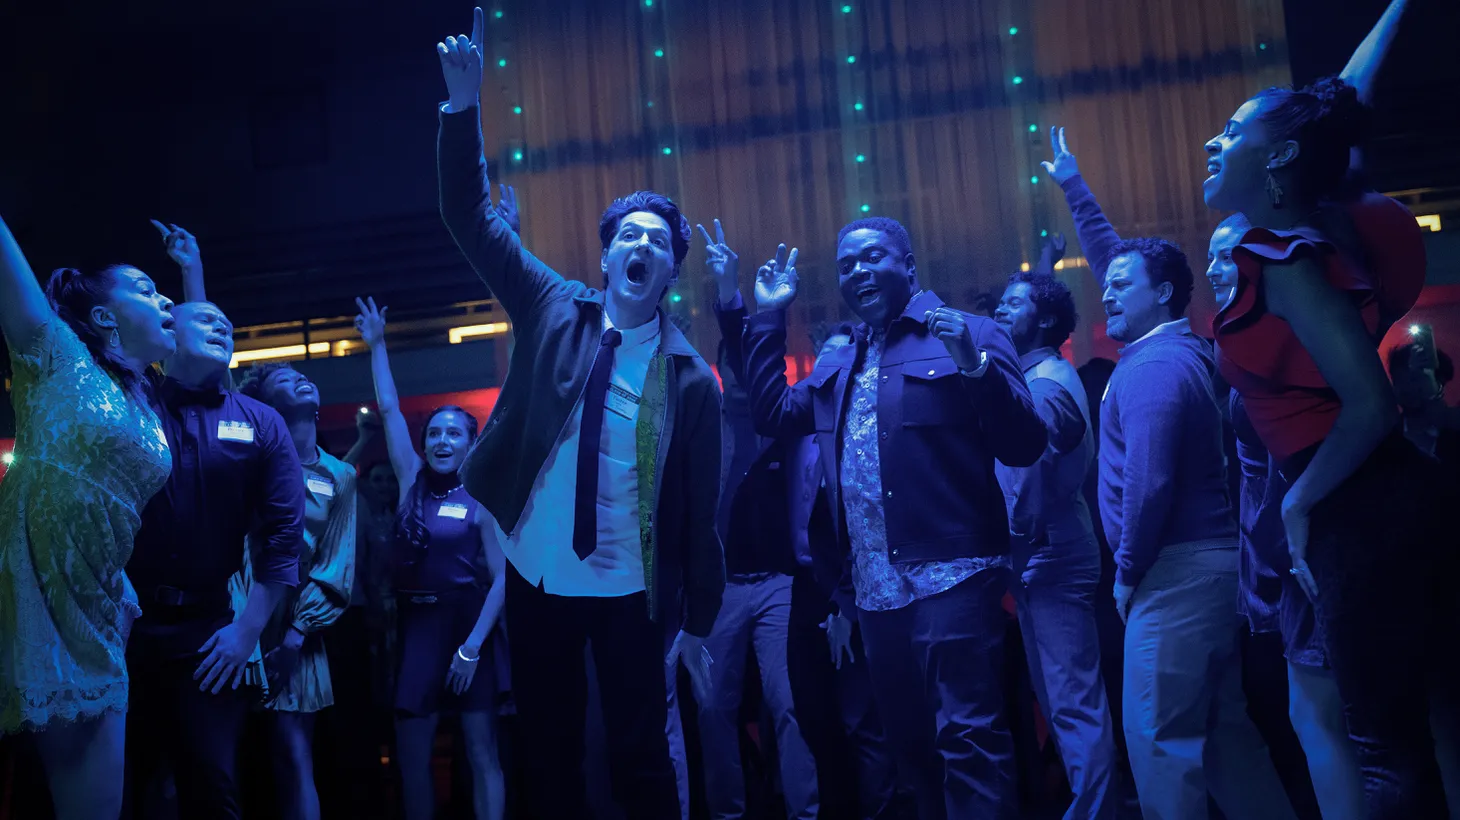 Ben Schwartz and Sam Richardson are two of the stars of Chris Miller and Phil Lord’s new series “The Afterparty.”